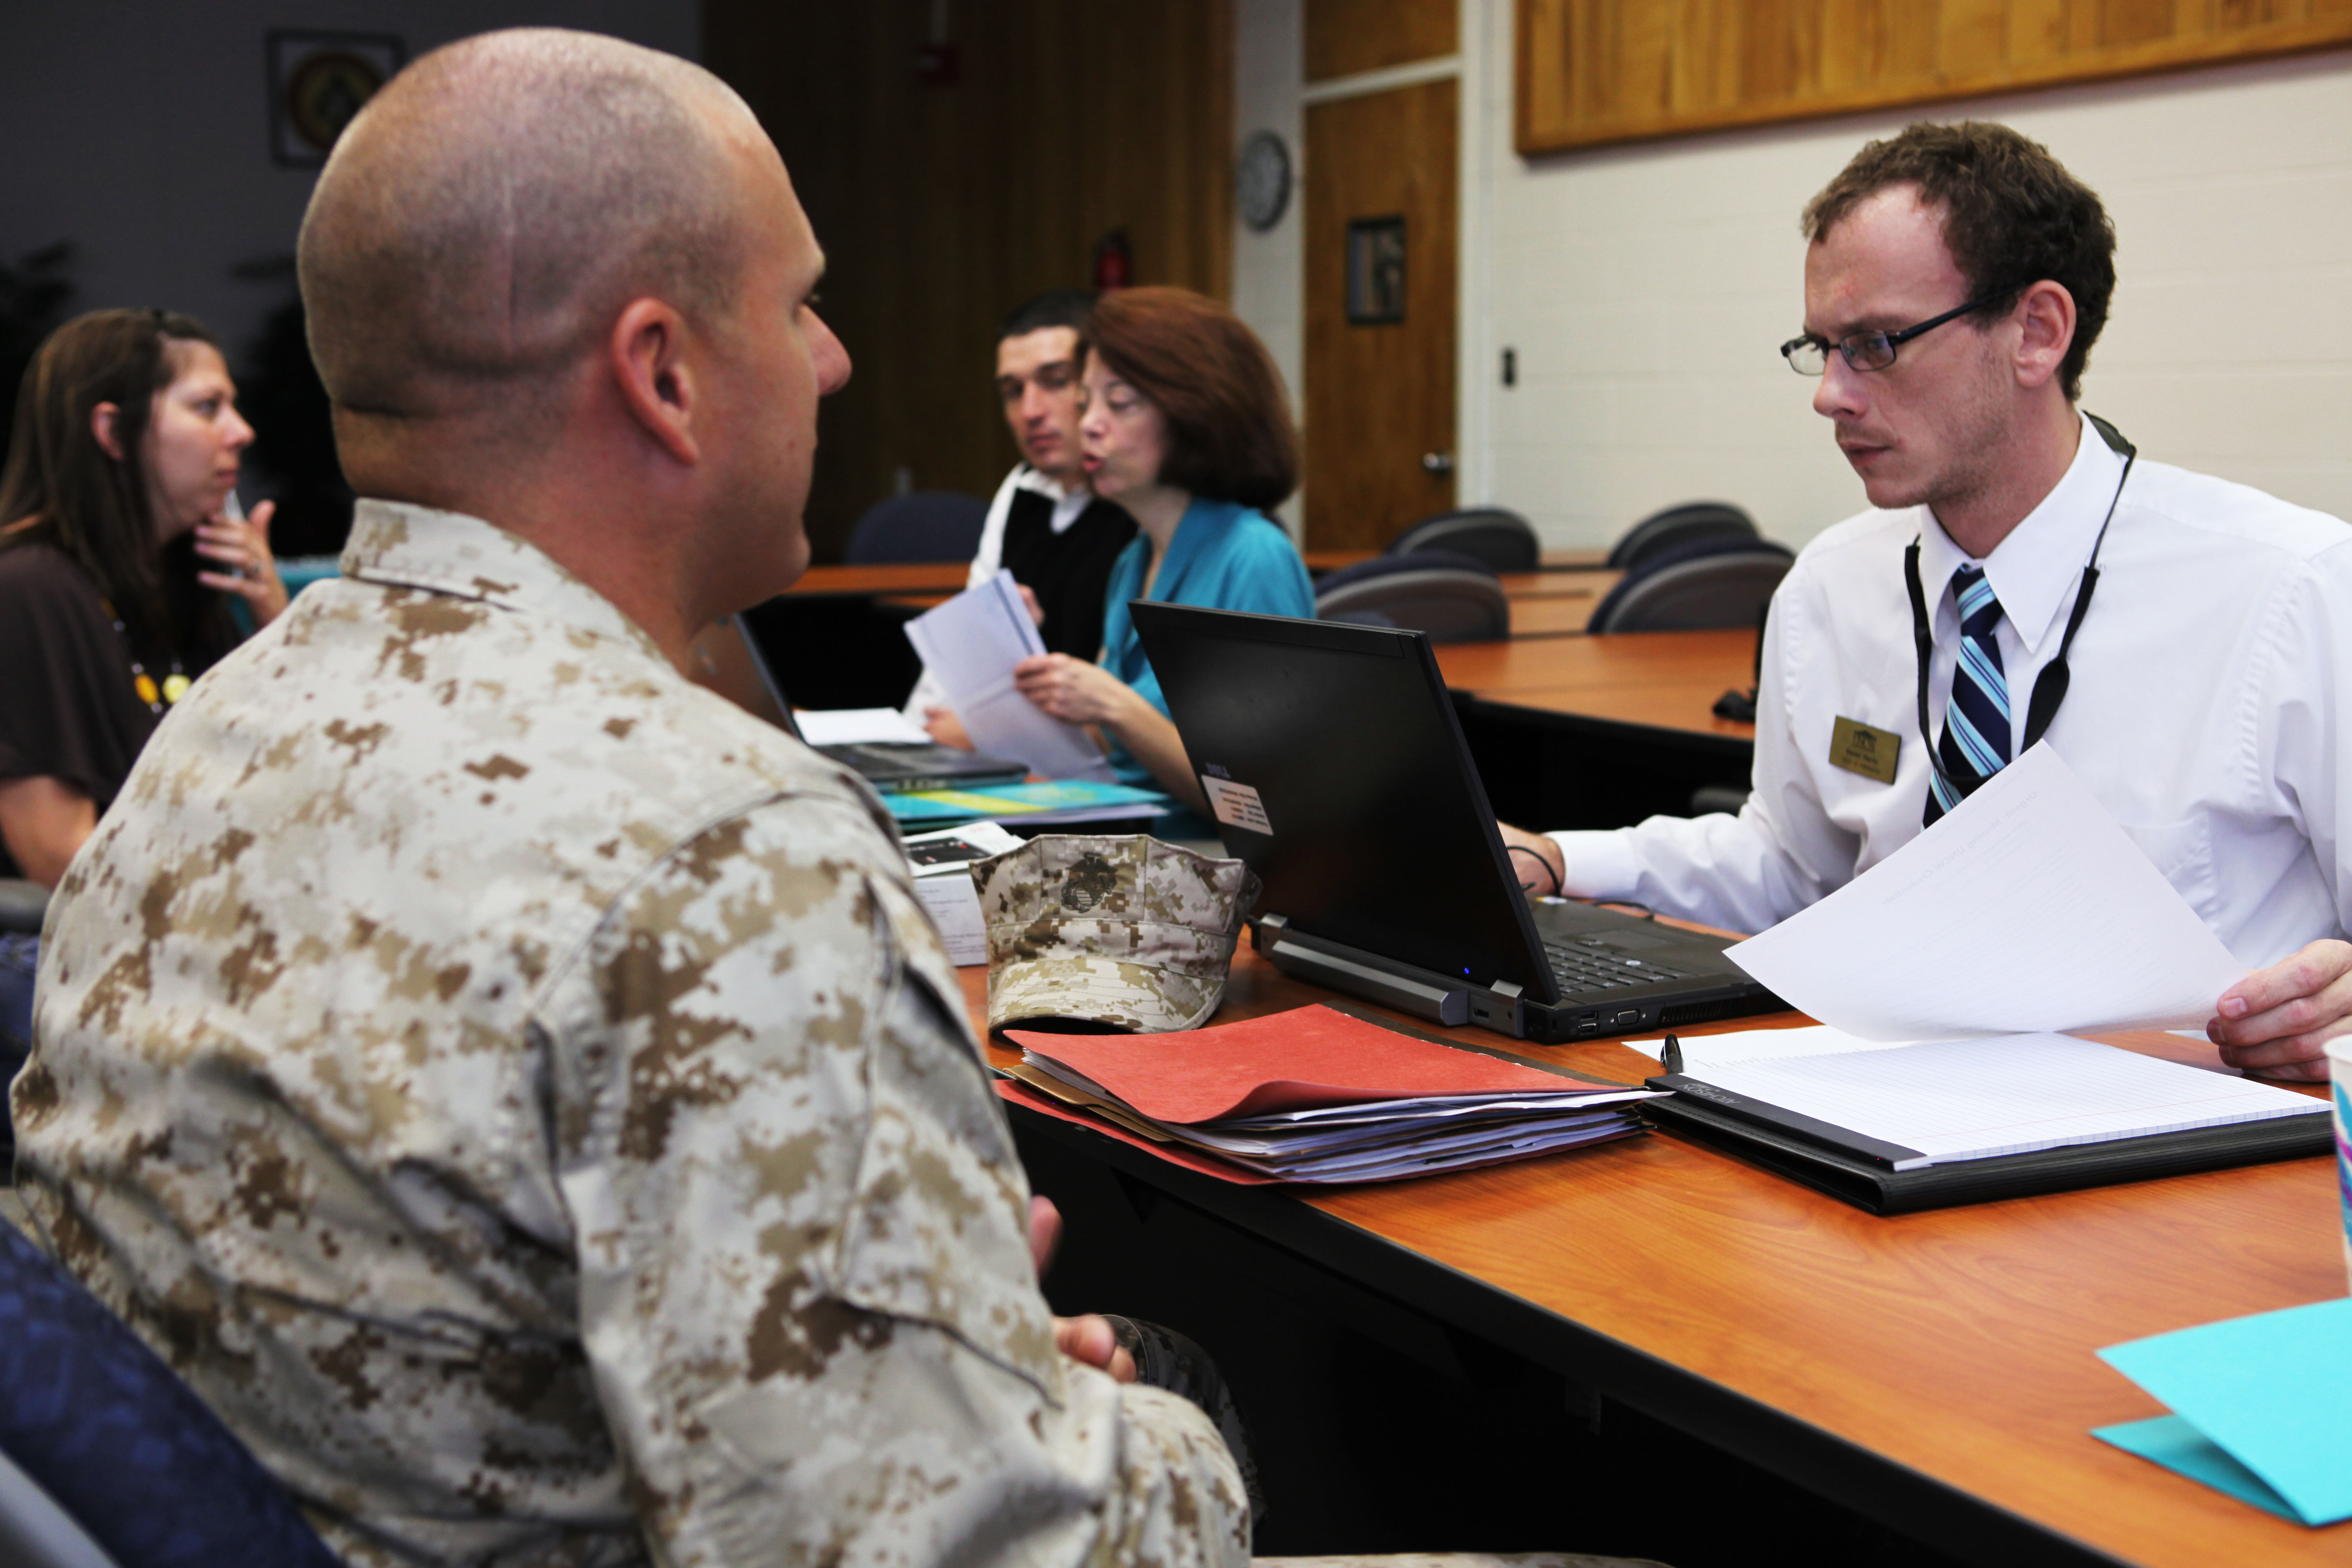 A service member consults with personnel